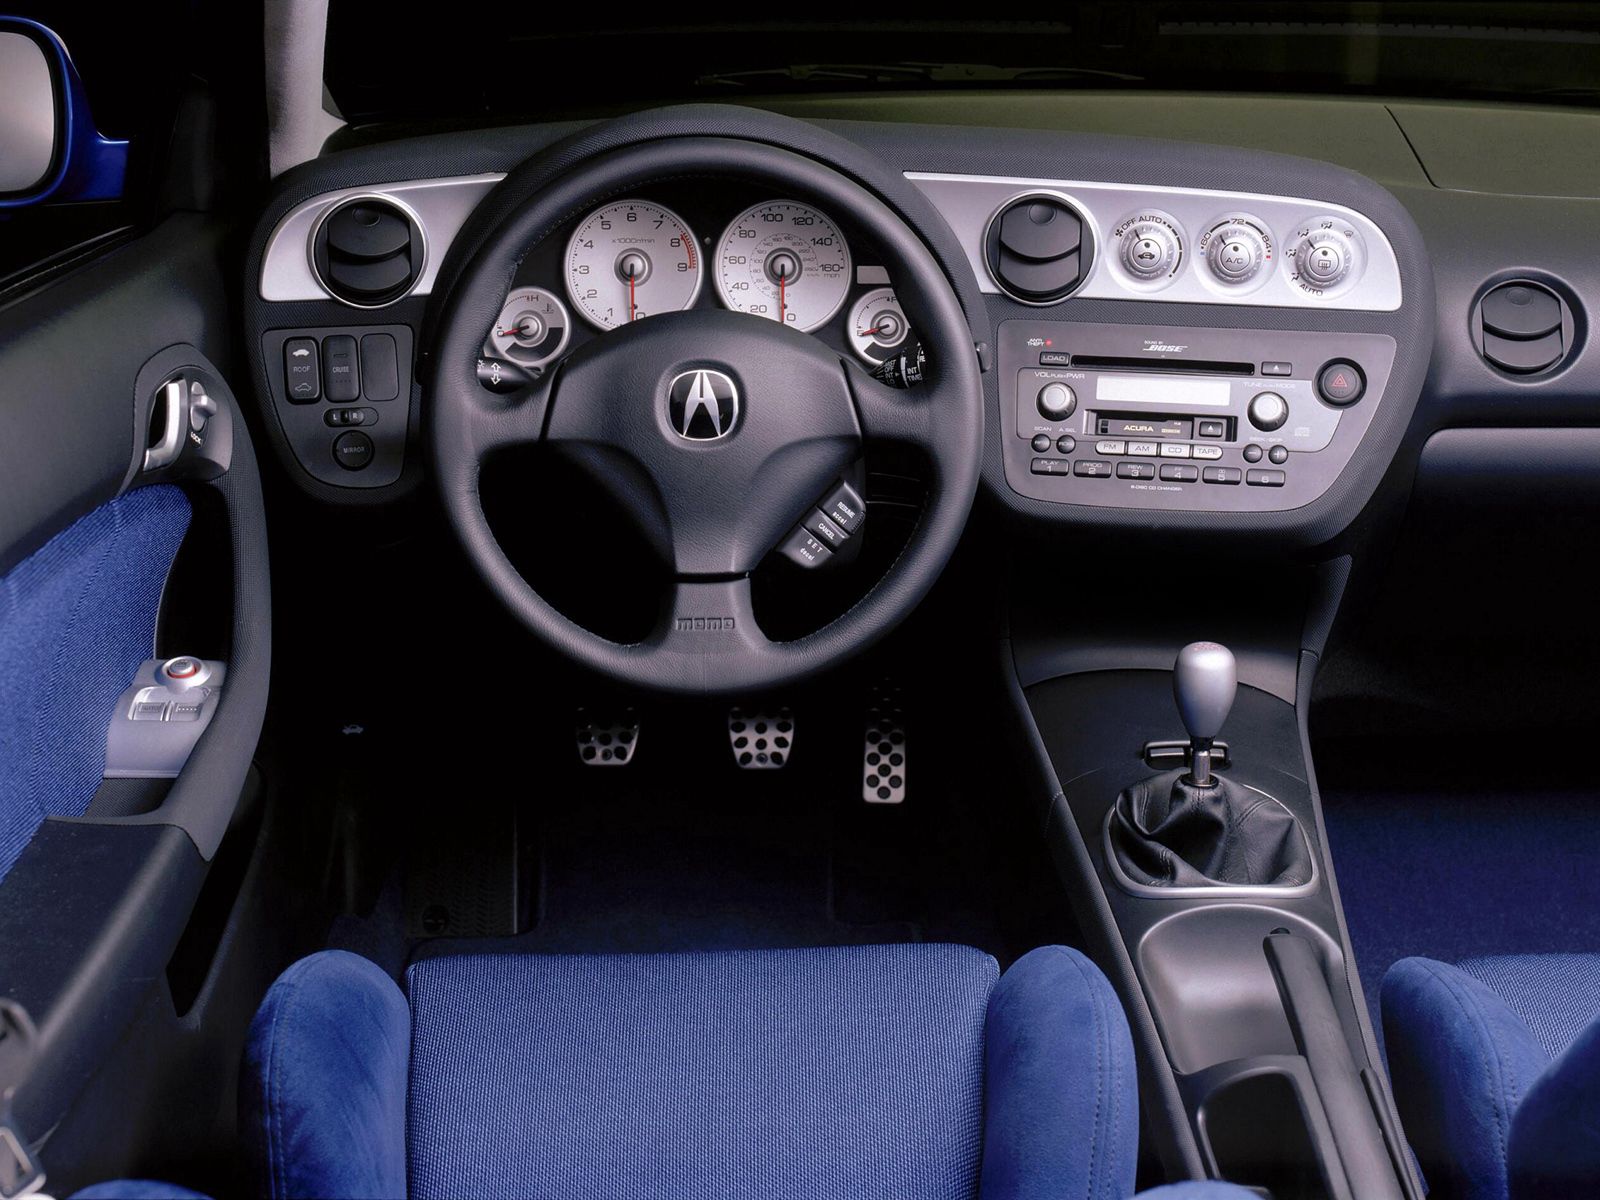 rudder, acura, interior, cars, concept, steering wheel, salon, speedometer, 2001, rs x wallpapers for tablet